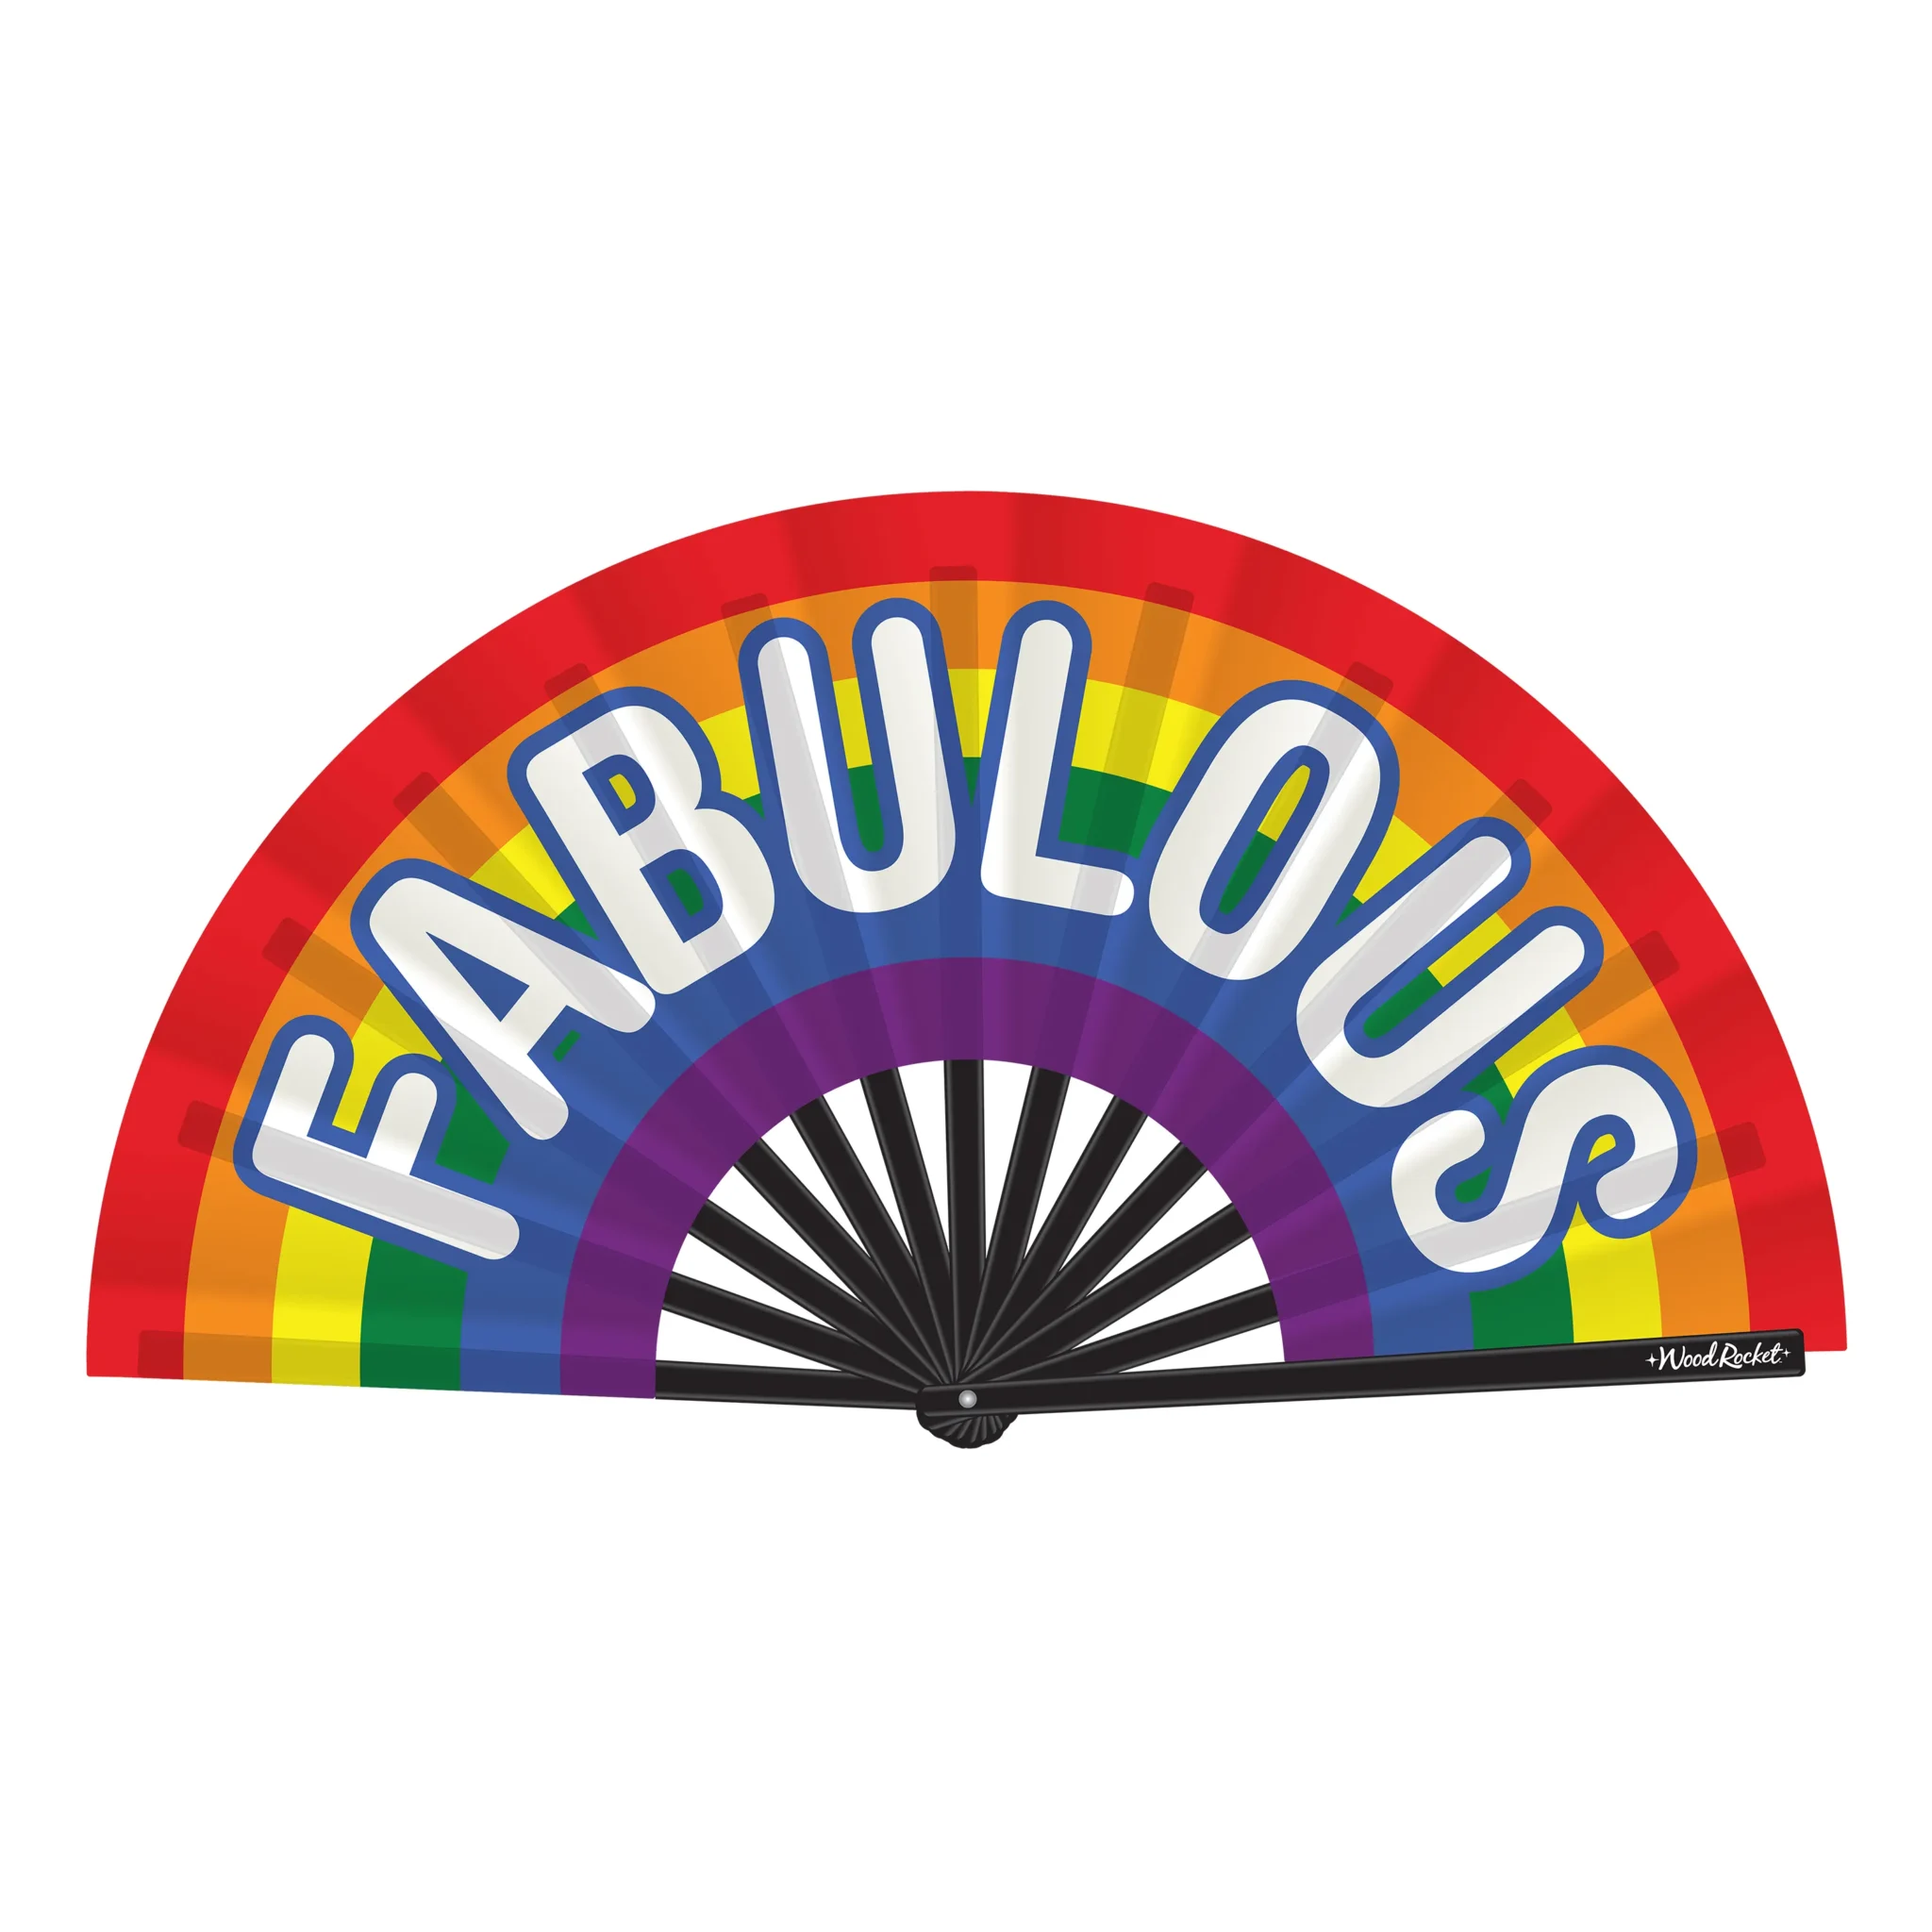 A fan with a rainbow color design and the word "FABULOUS" written across it in large, white letters.